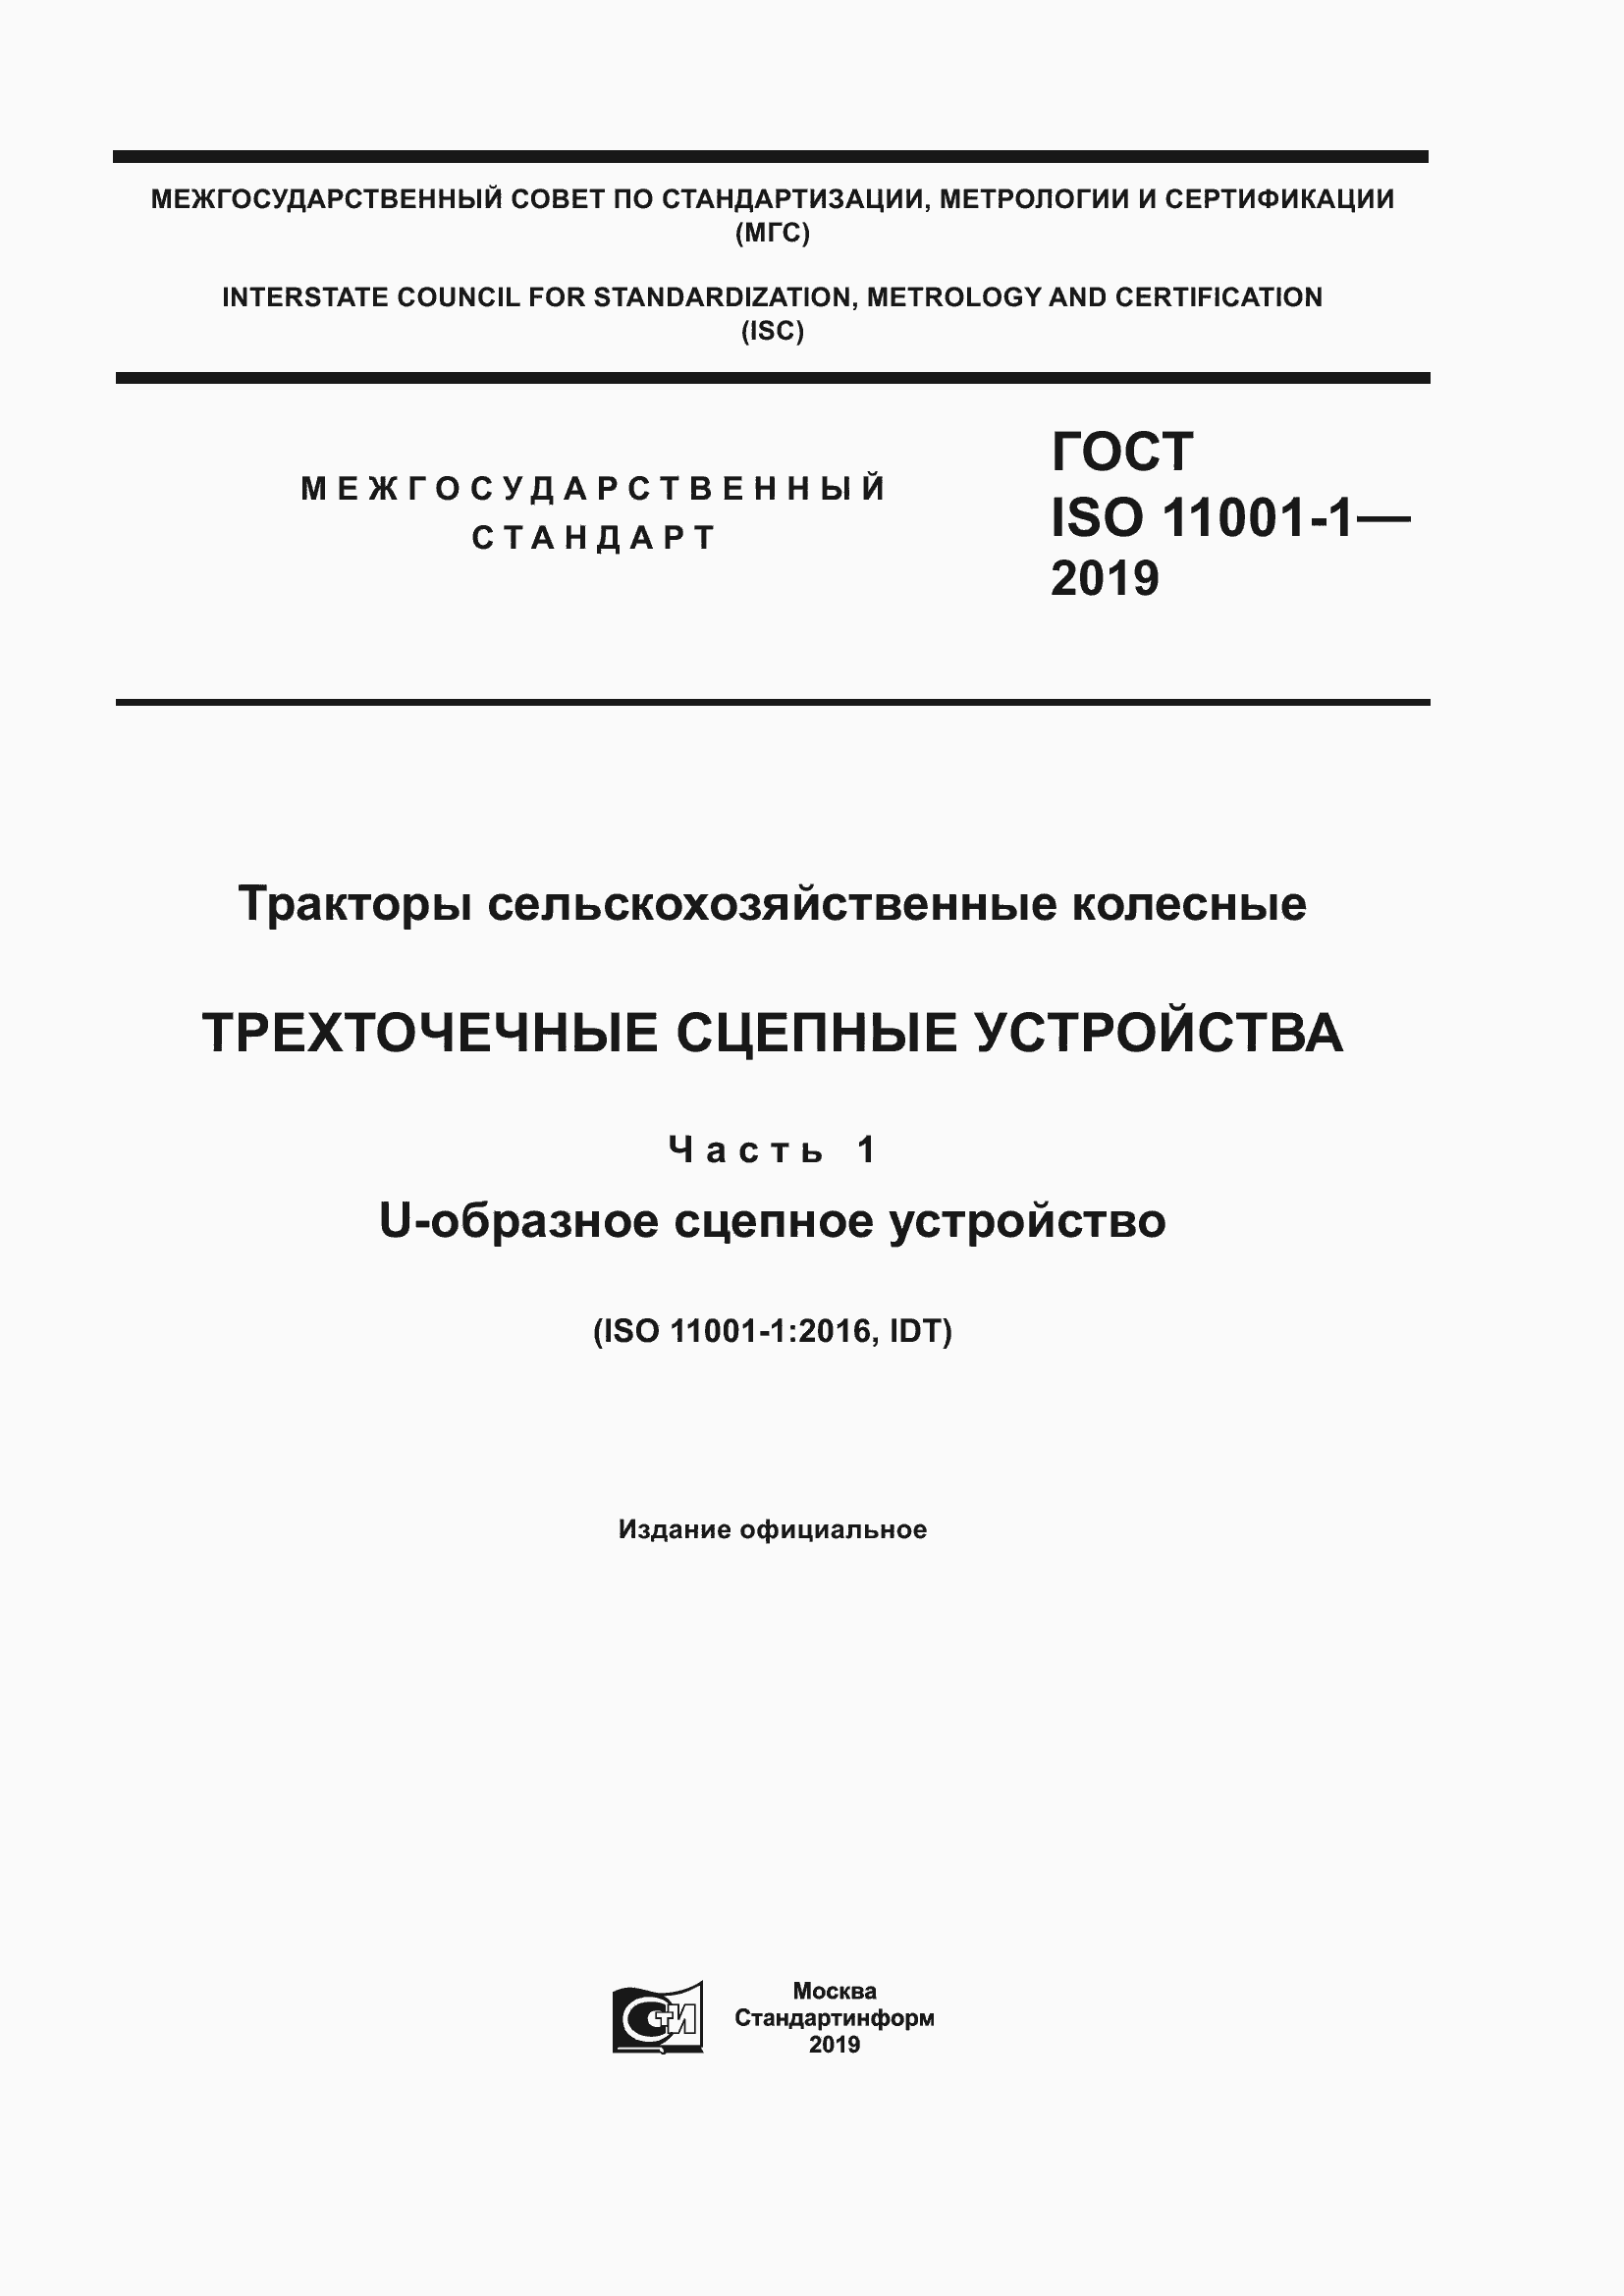  ISO 11001-1-2019.  1